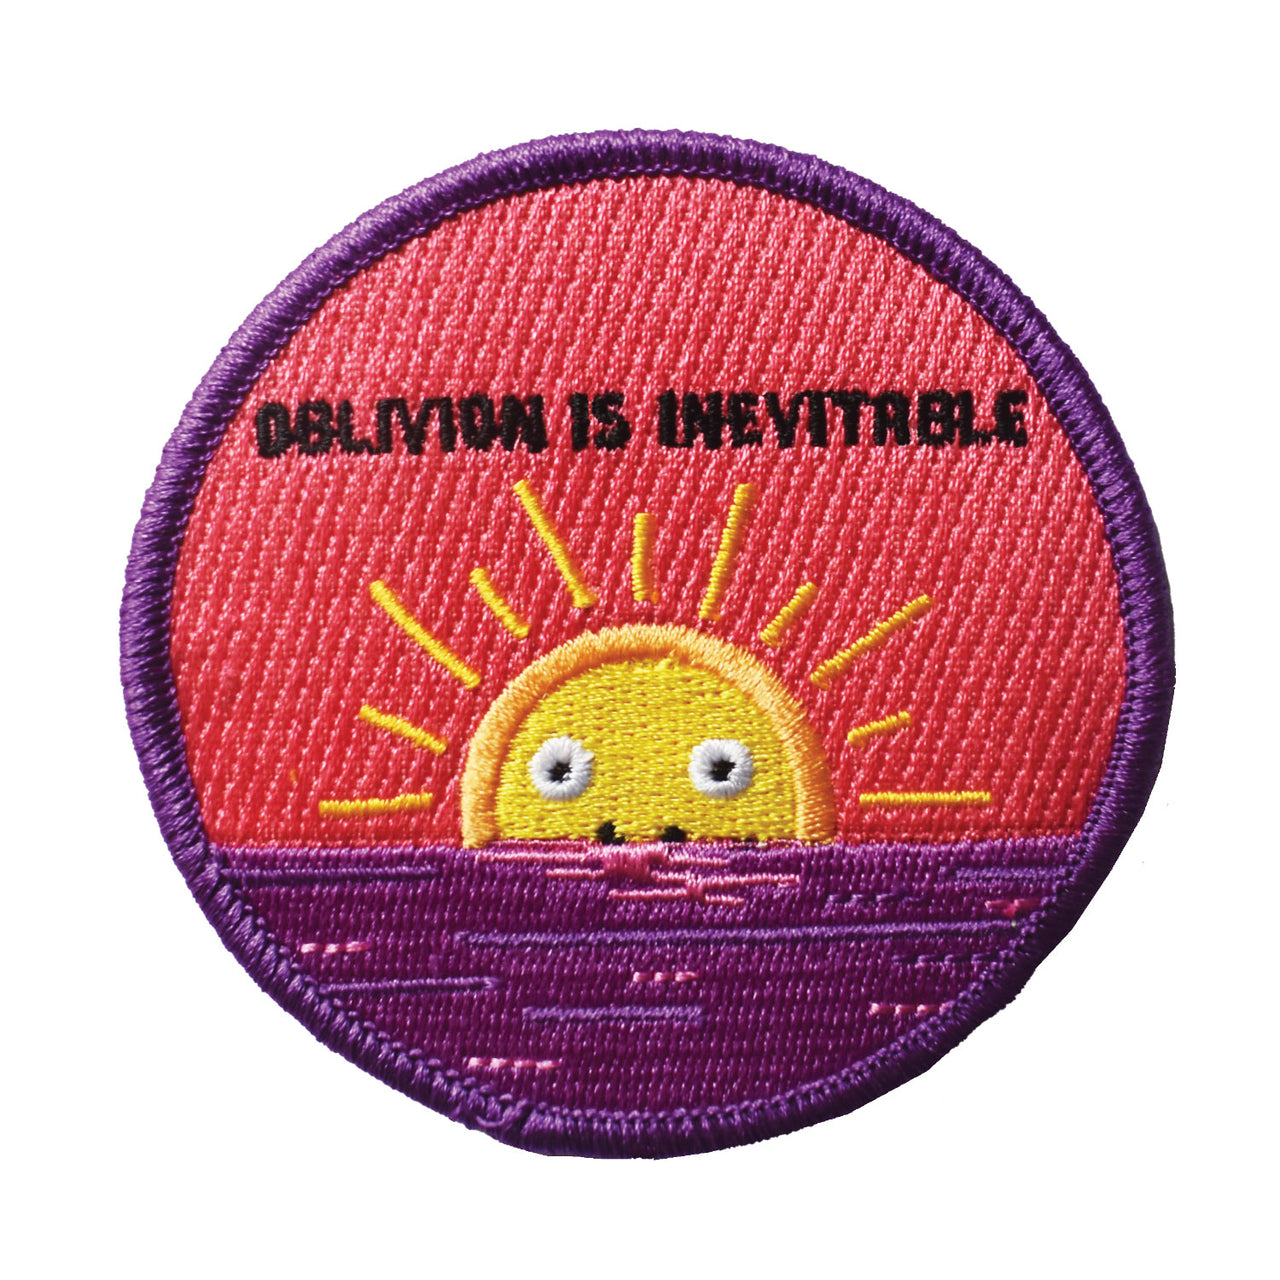 Oblivion is Inevitable (Iron-On Patch)